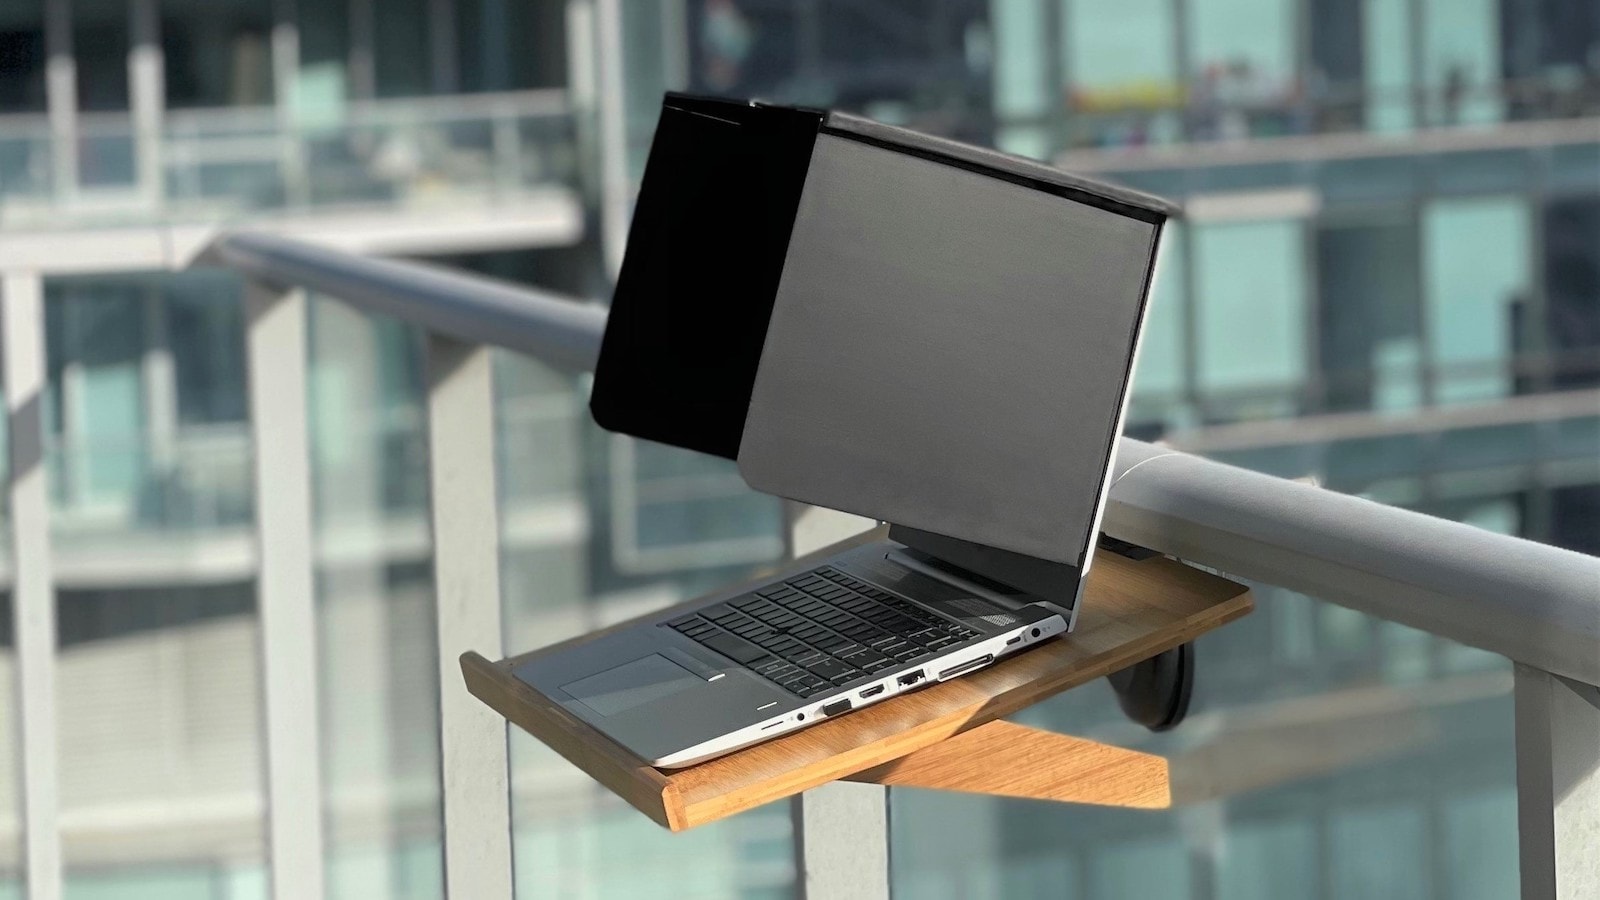 10 more smart office gadgets to add to your home workspace » Gadget Flow